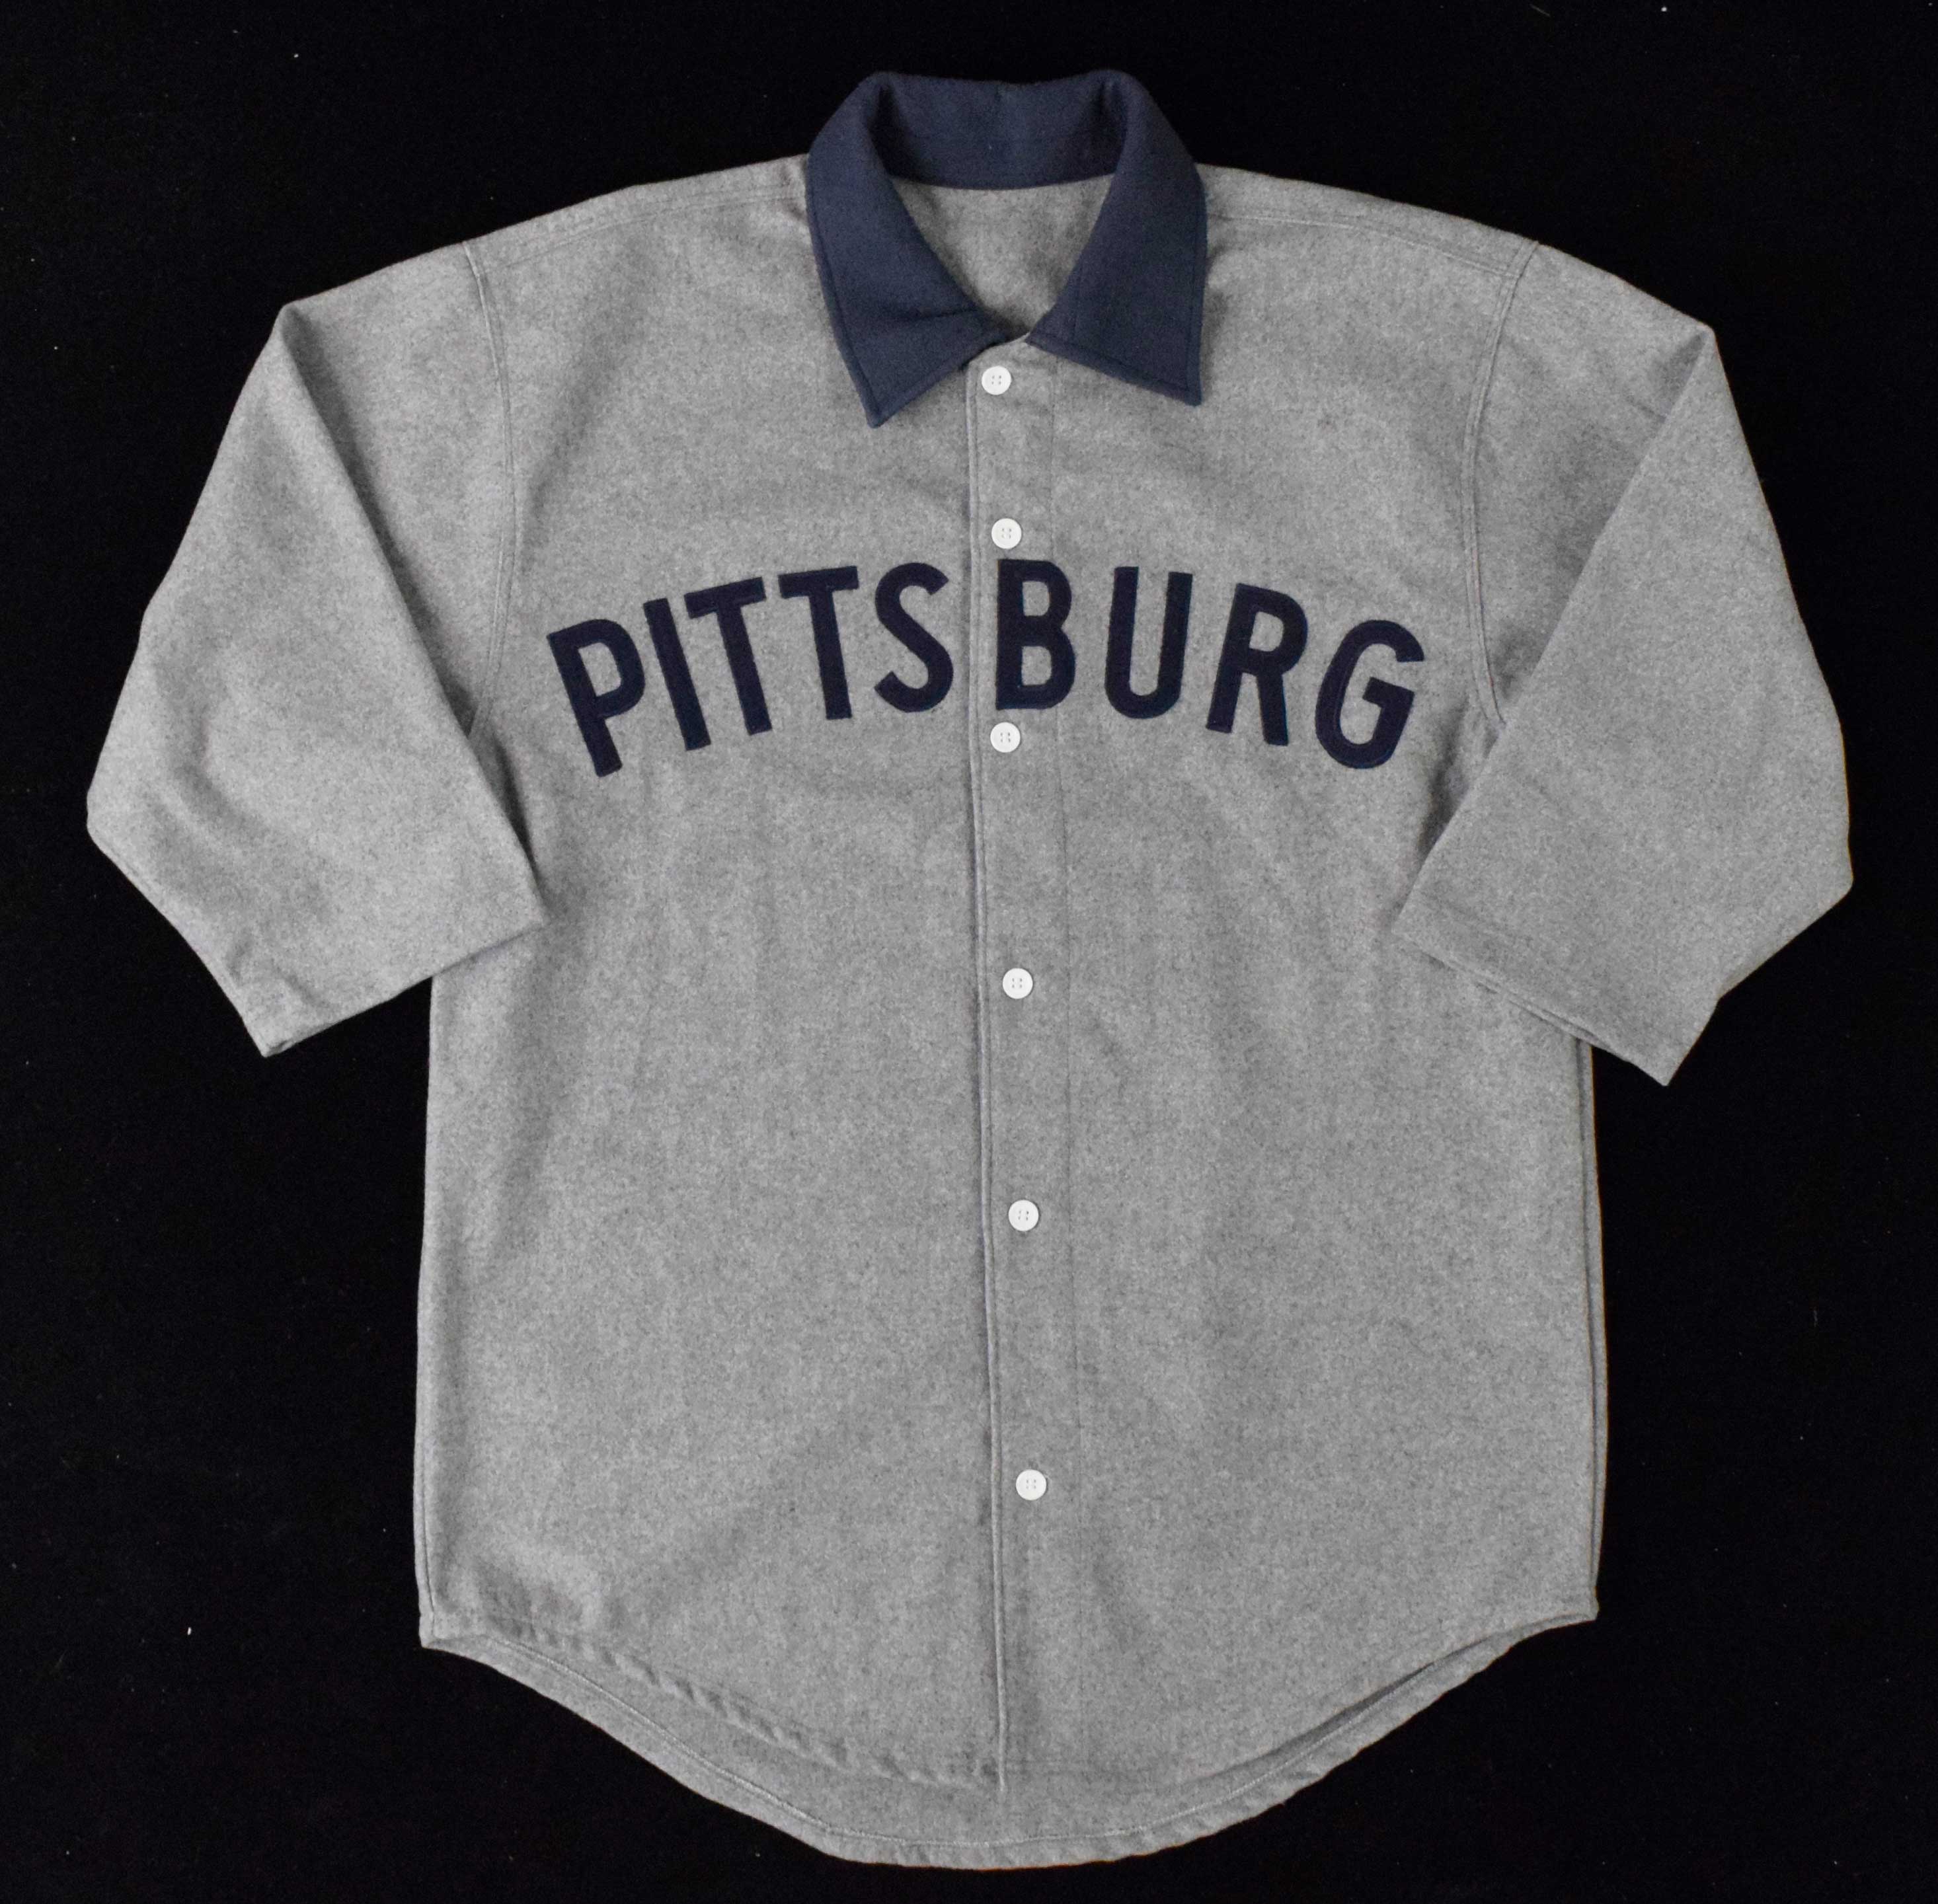 Honus Wagner replica jersey from the Ted Williams Museum